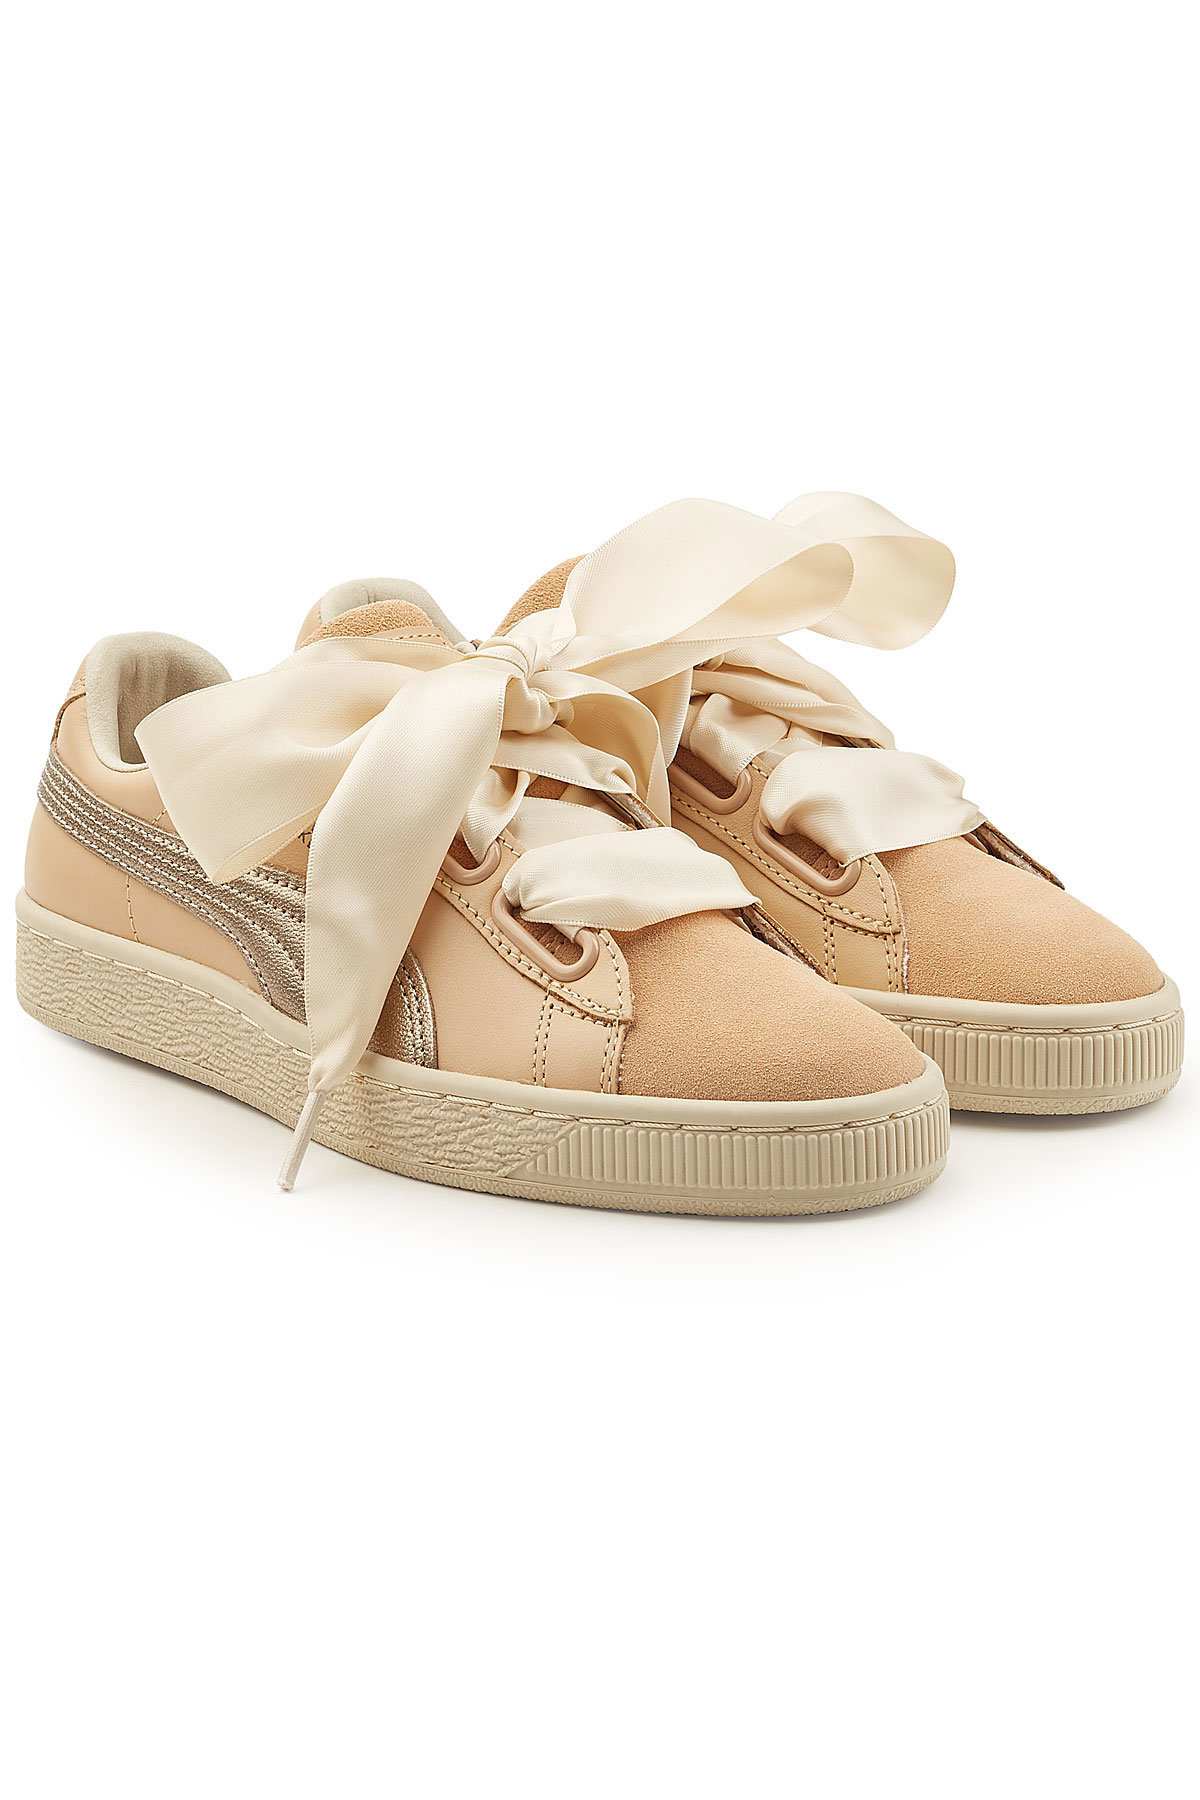 Basket Heart Suede and Leather Sneakers by Puma